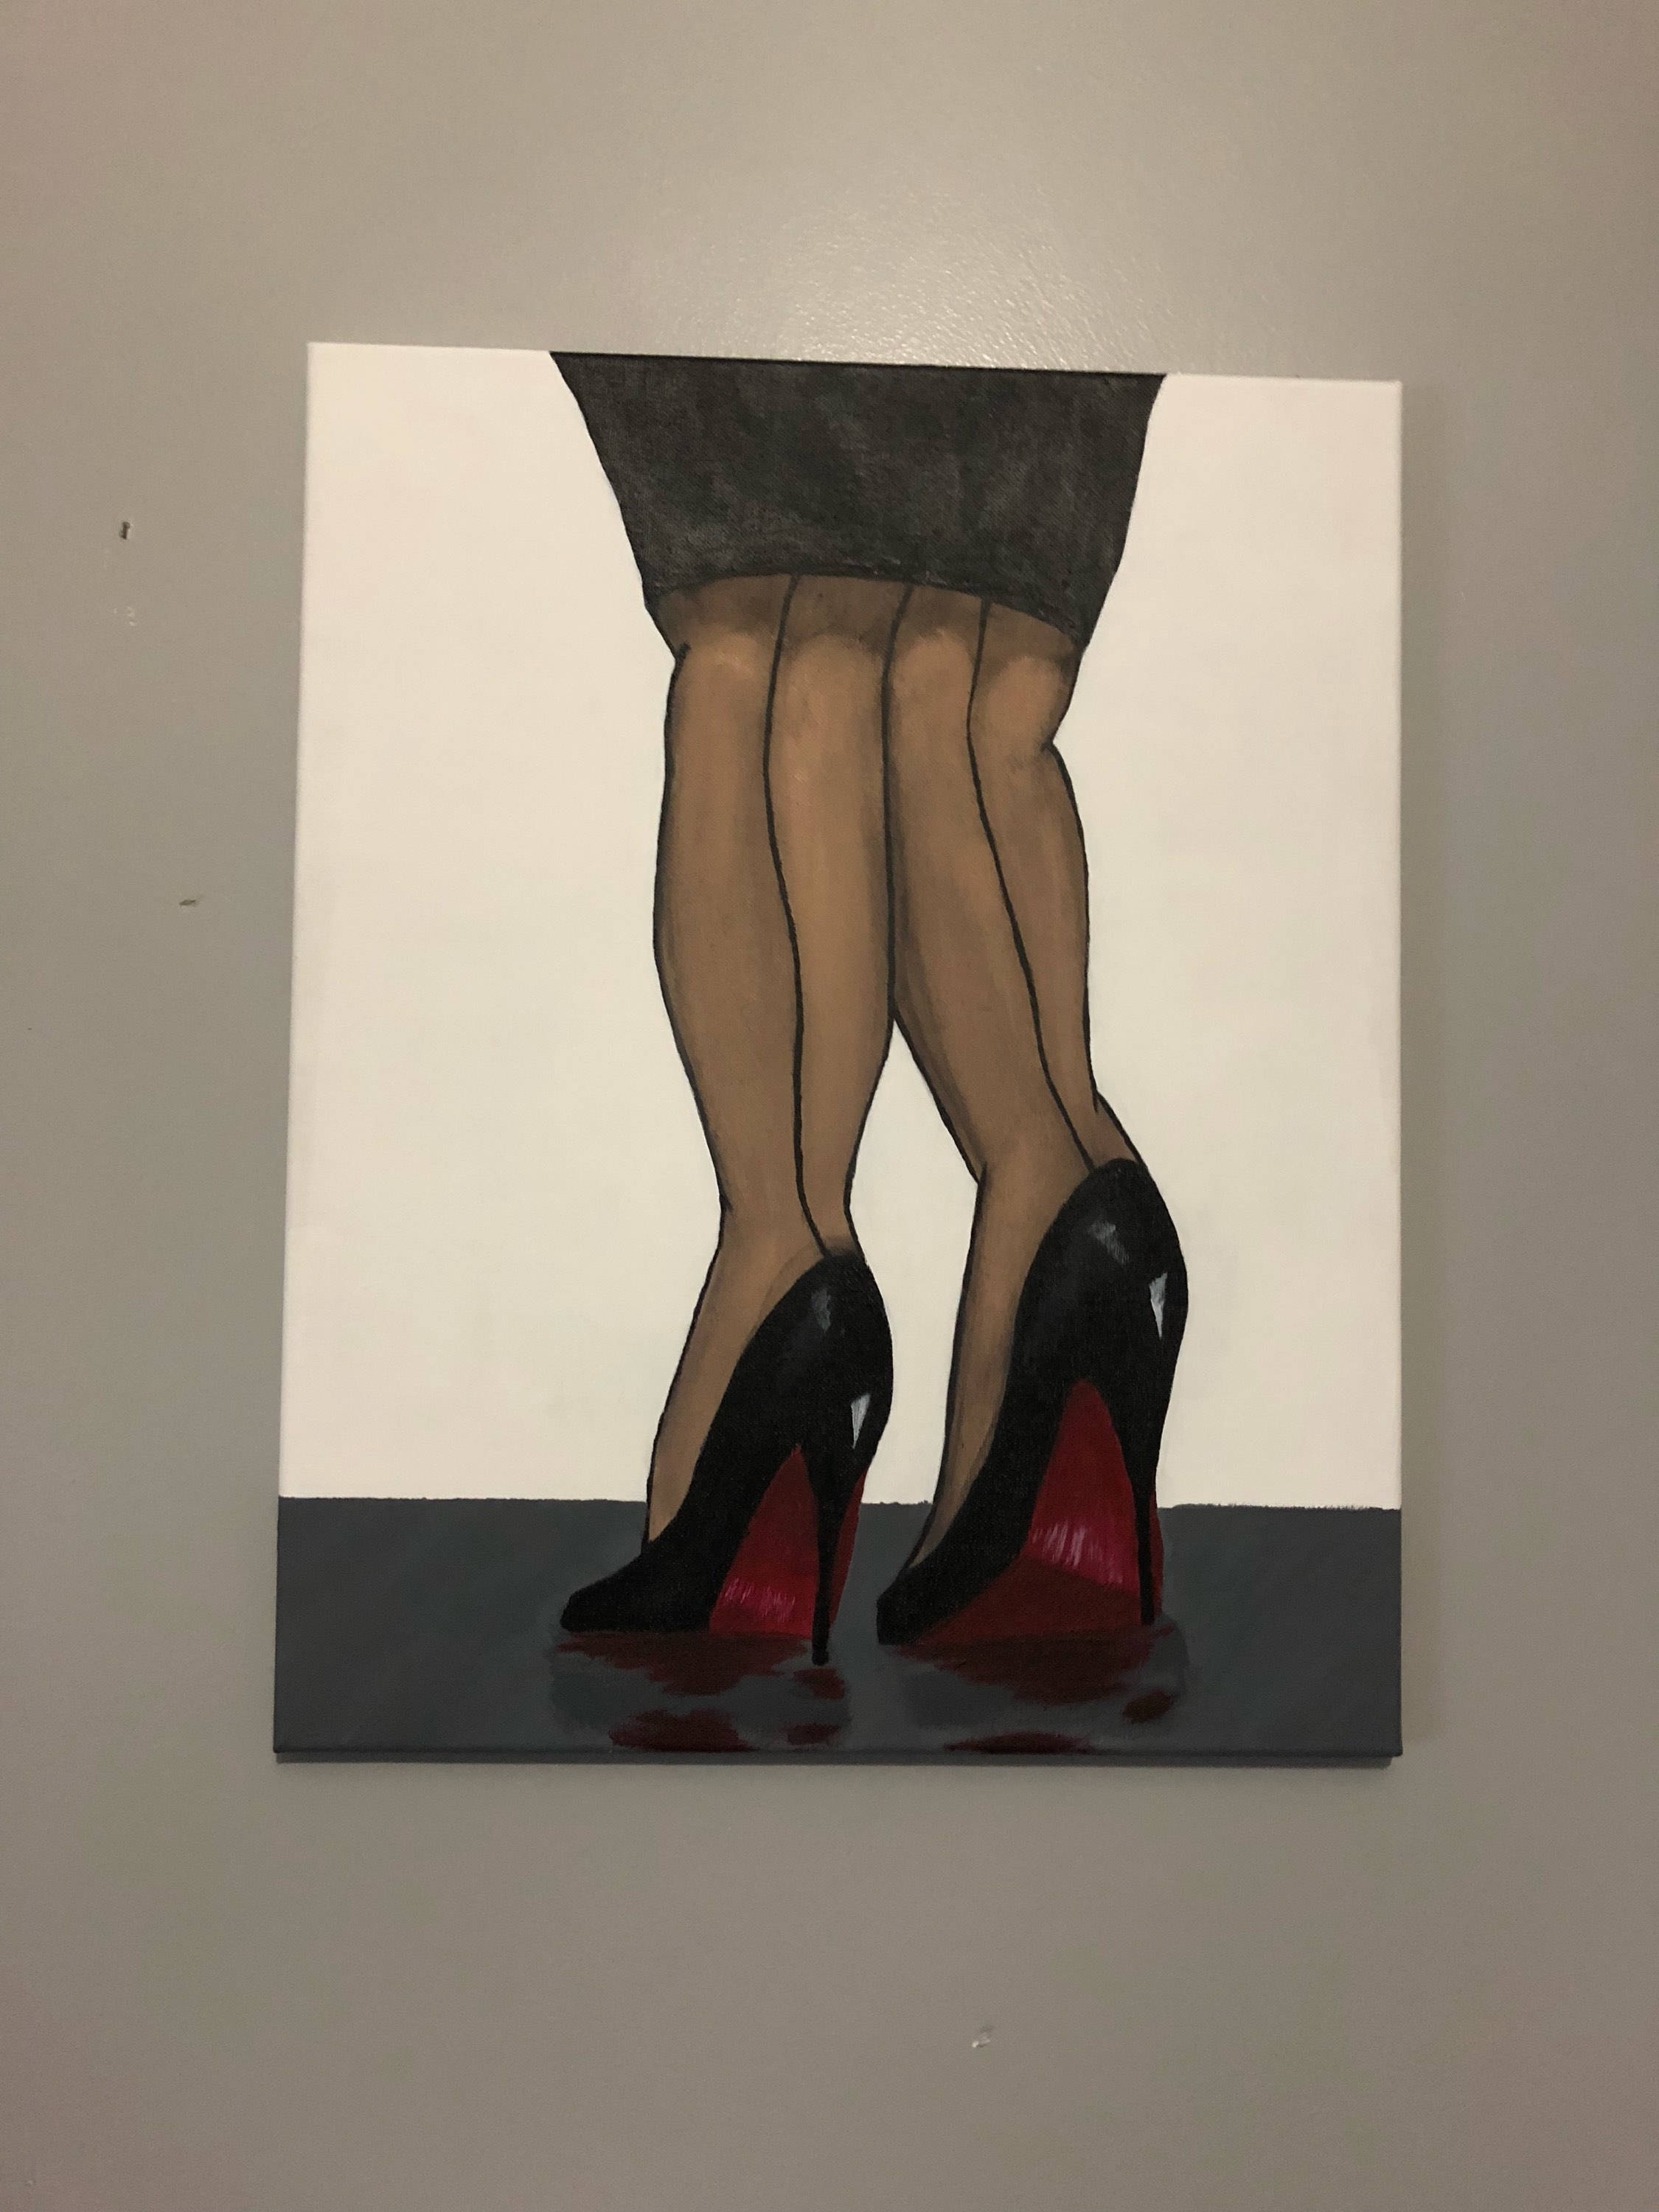 Bloody Shoes Wall Art for Sale